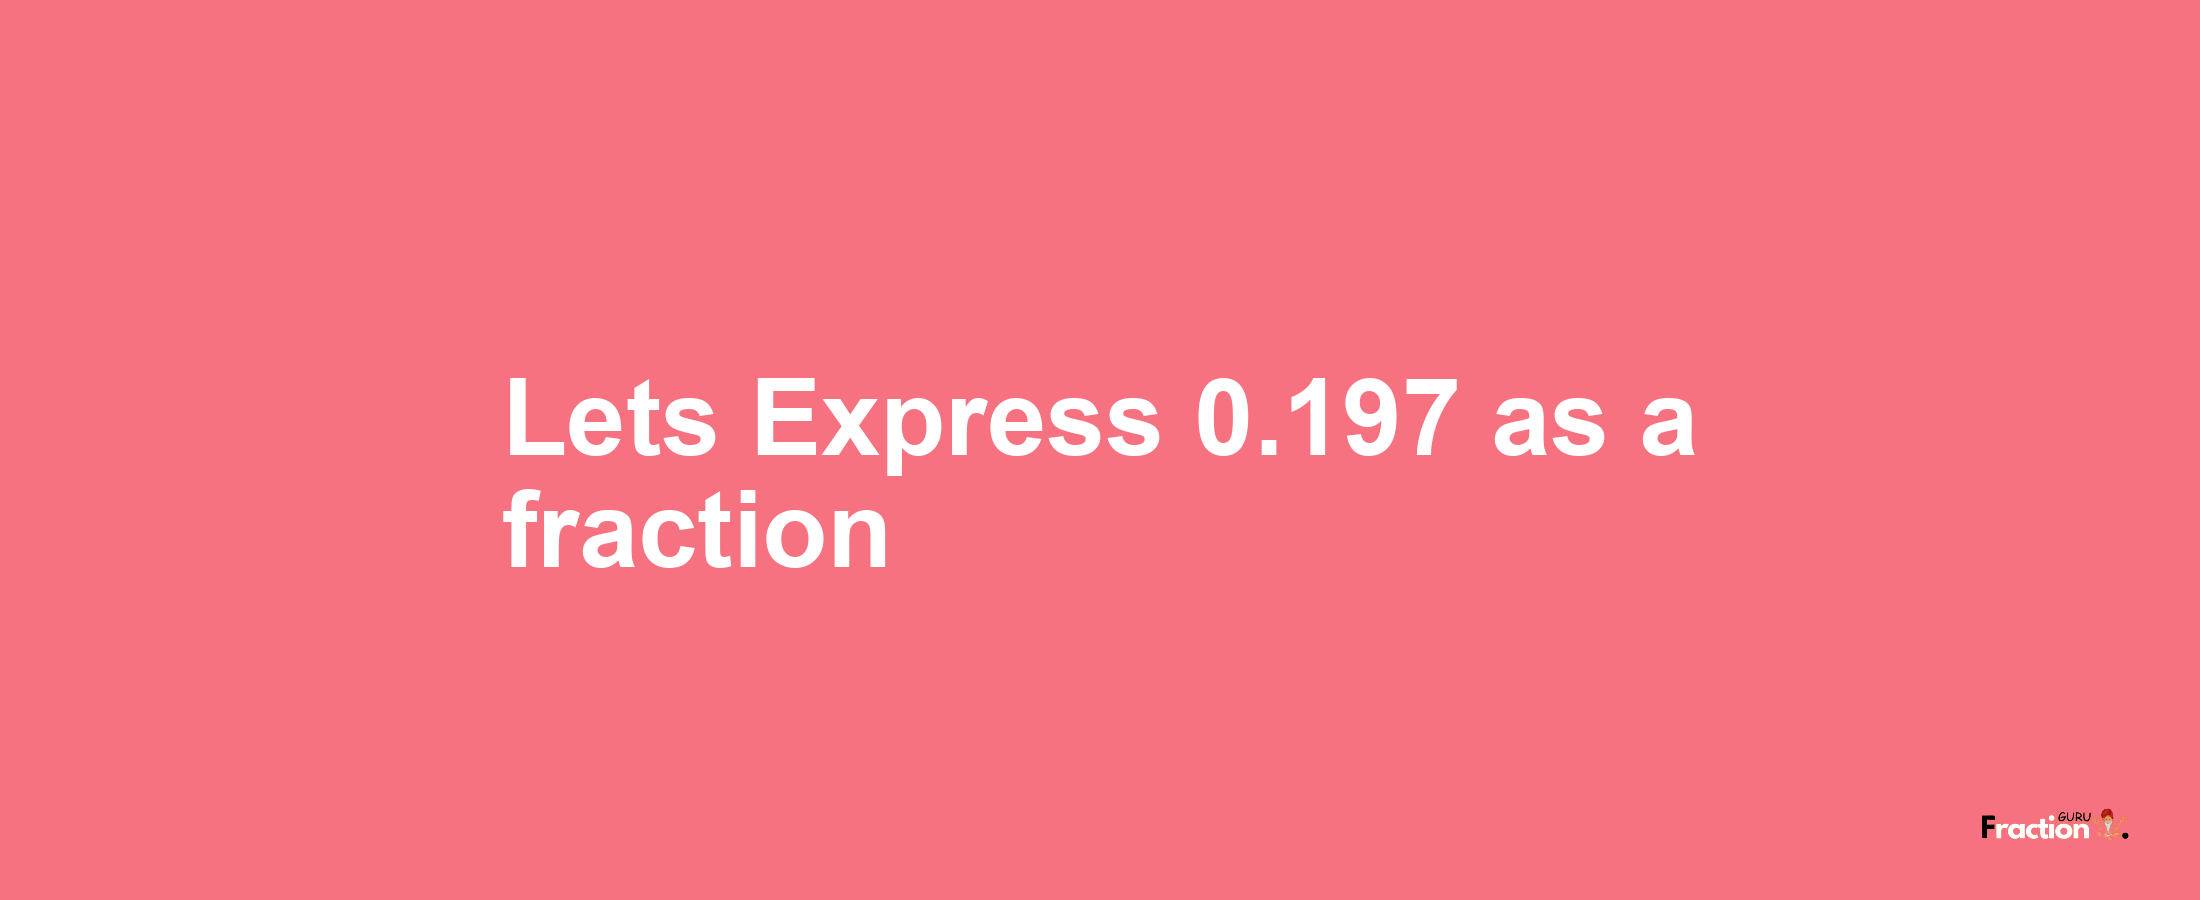 Lets Express 0.197 as afraction